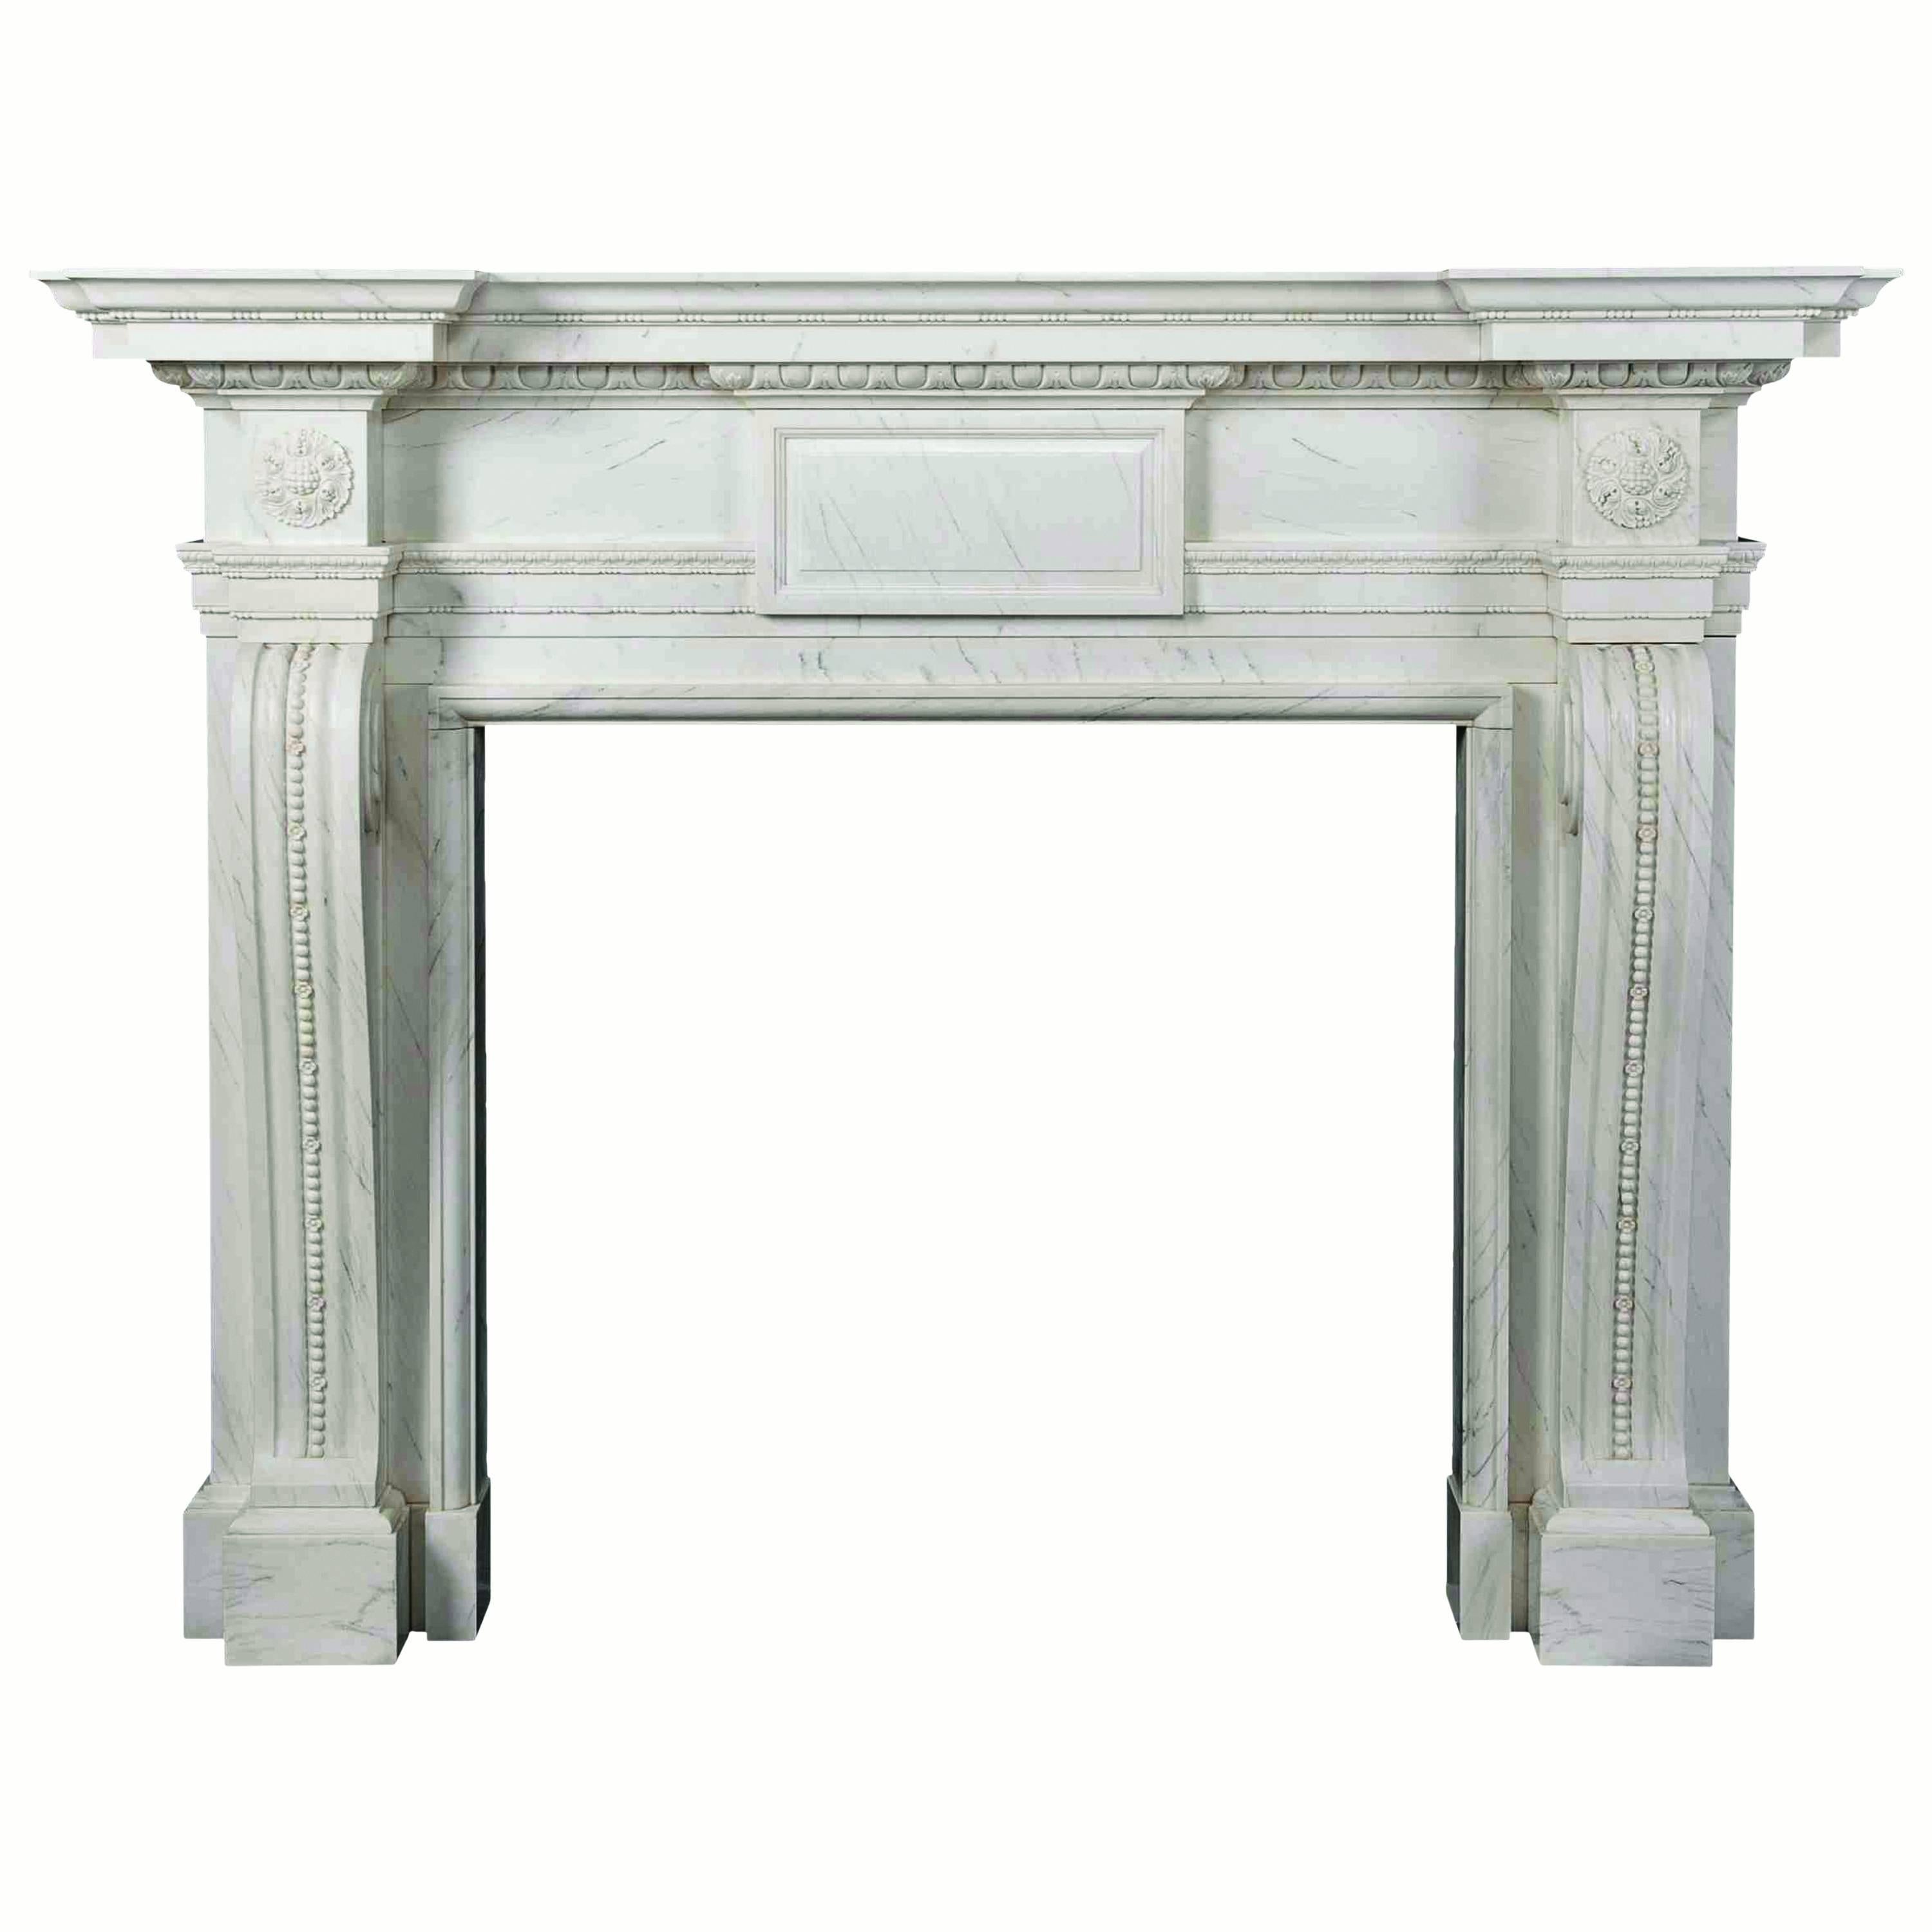 18th Century Reproduction Mantel with Fine Carving in Statuary Marble